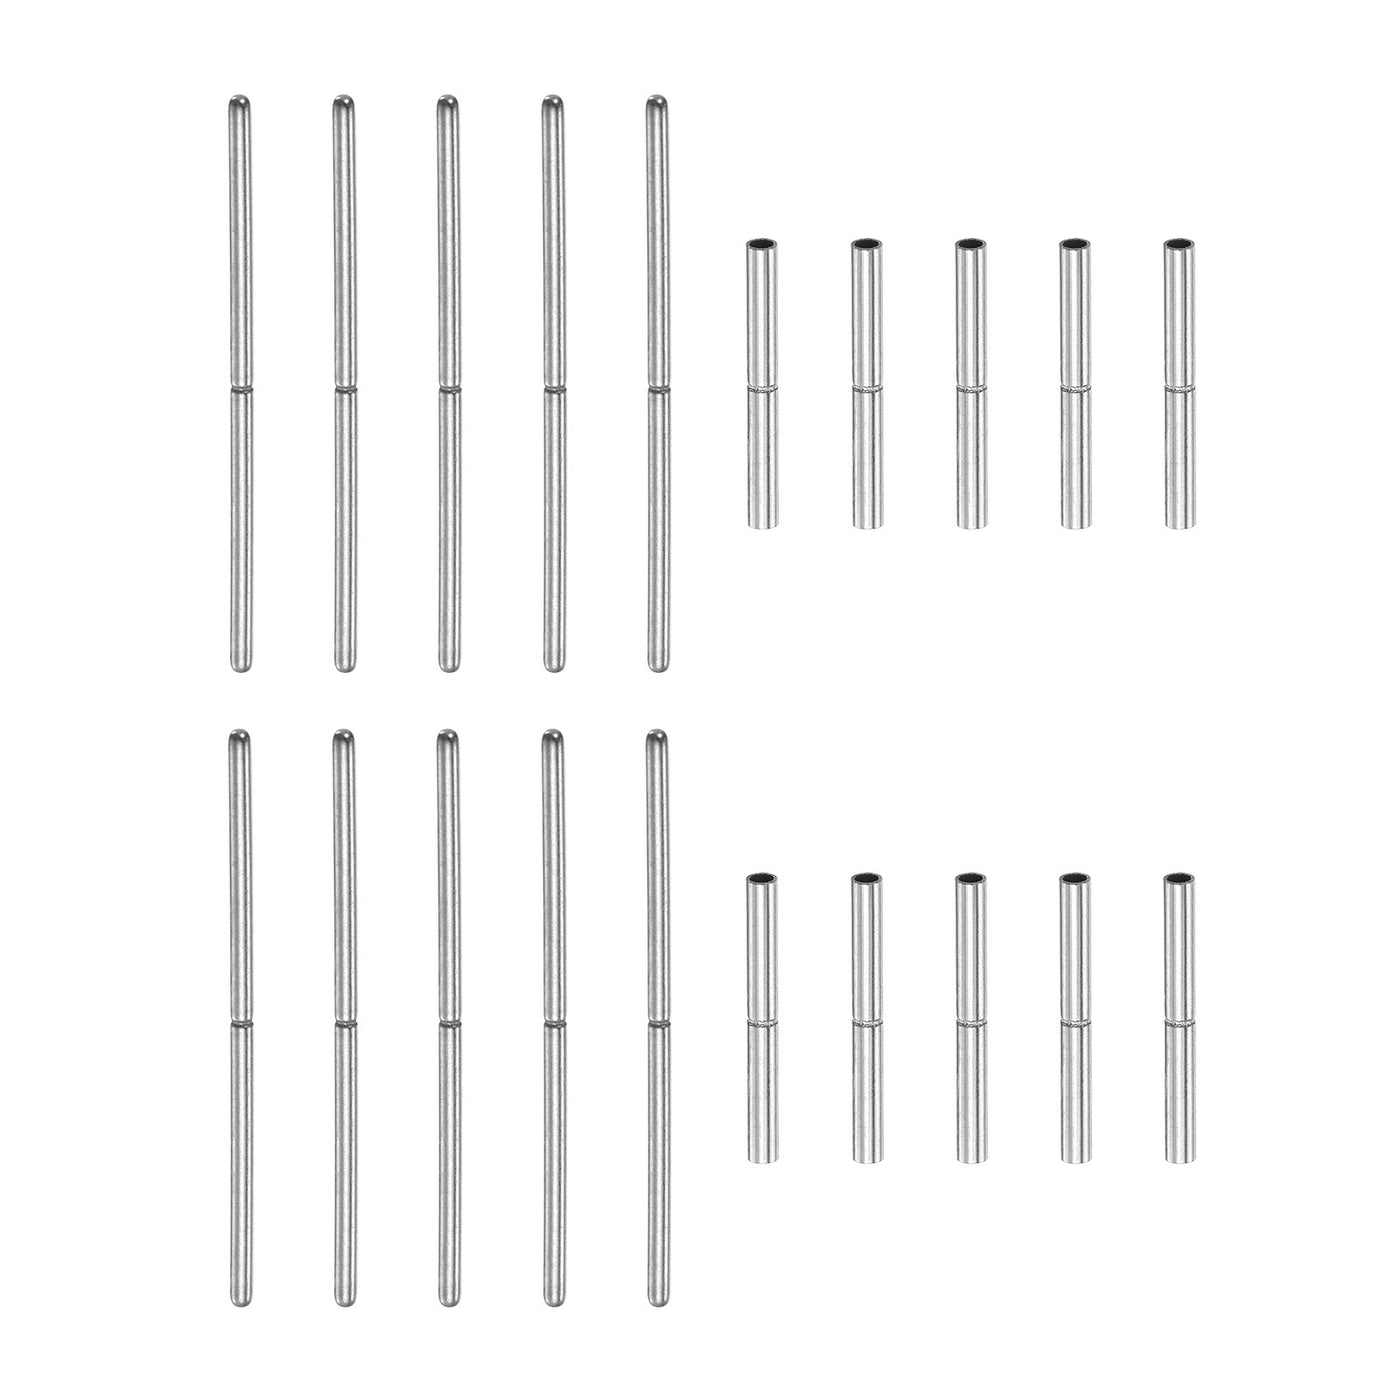 Harfington Watch Strap Tubes Pins, Stainless Steel Connecting Shaft for Watch Band